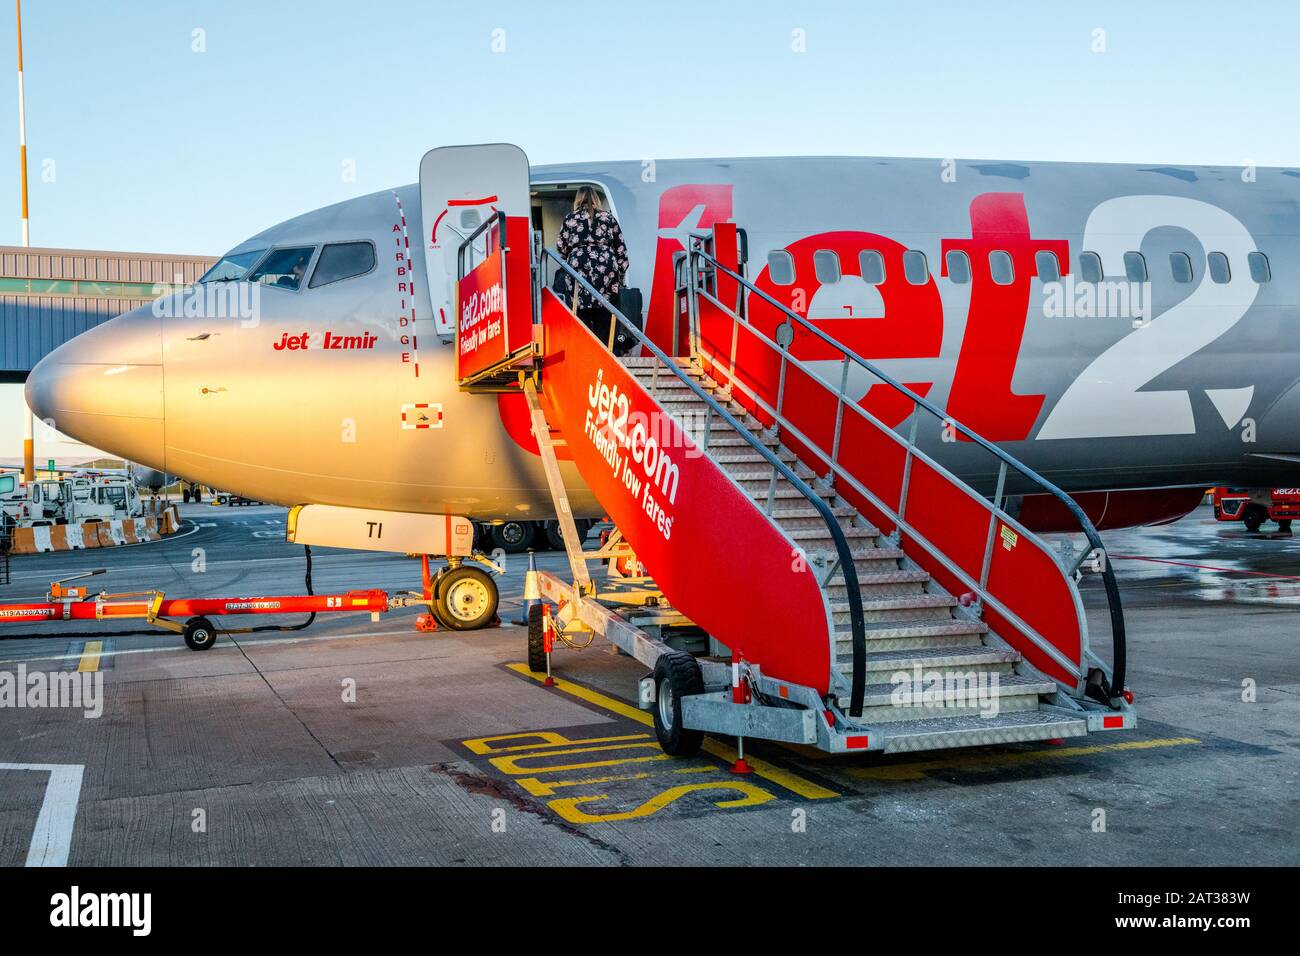 Passengers boarding a Jet2 Boeing 737-8FH jet at East Midlands airport. Stock Photo